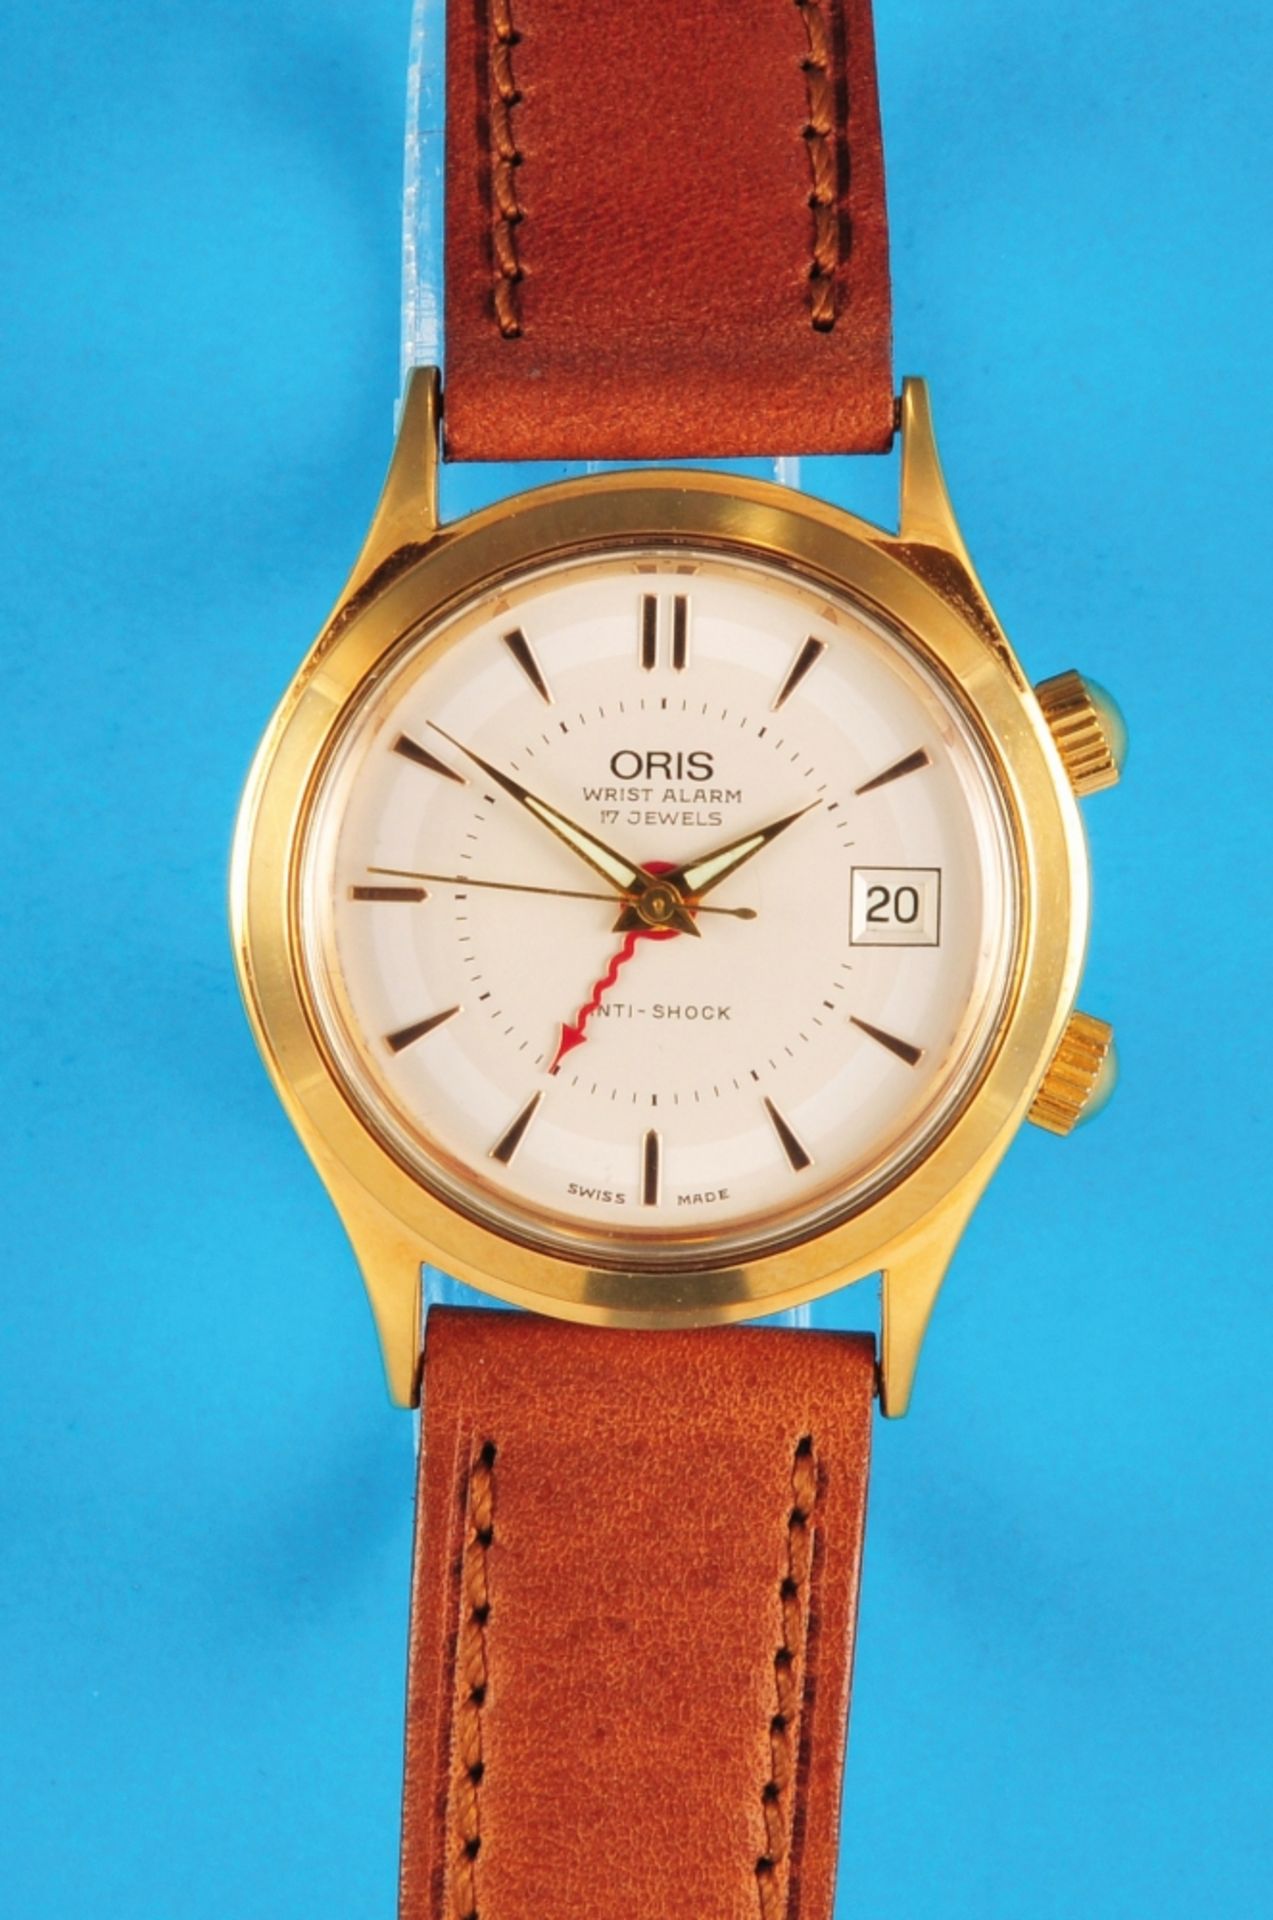 Oris "Wrist Alarm" Wristwatch with central second hand, date and alarm